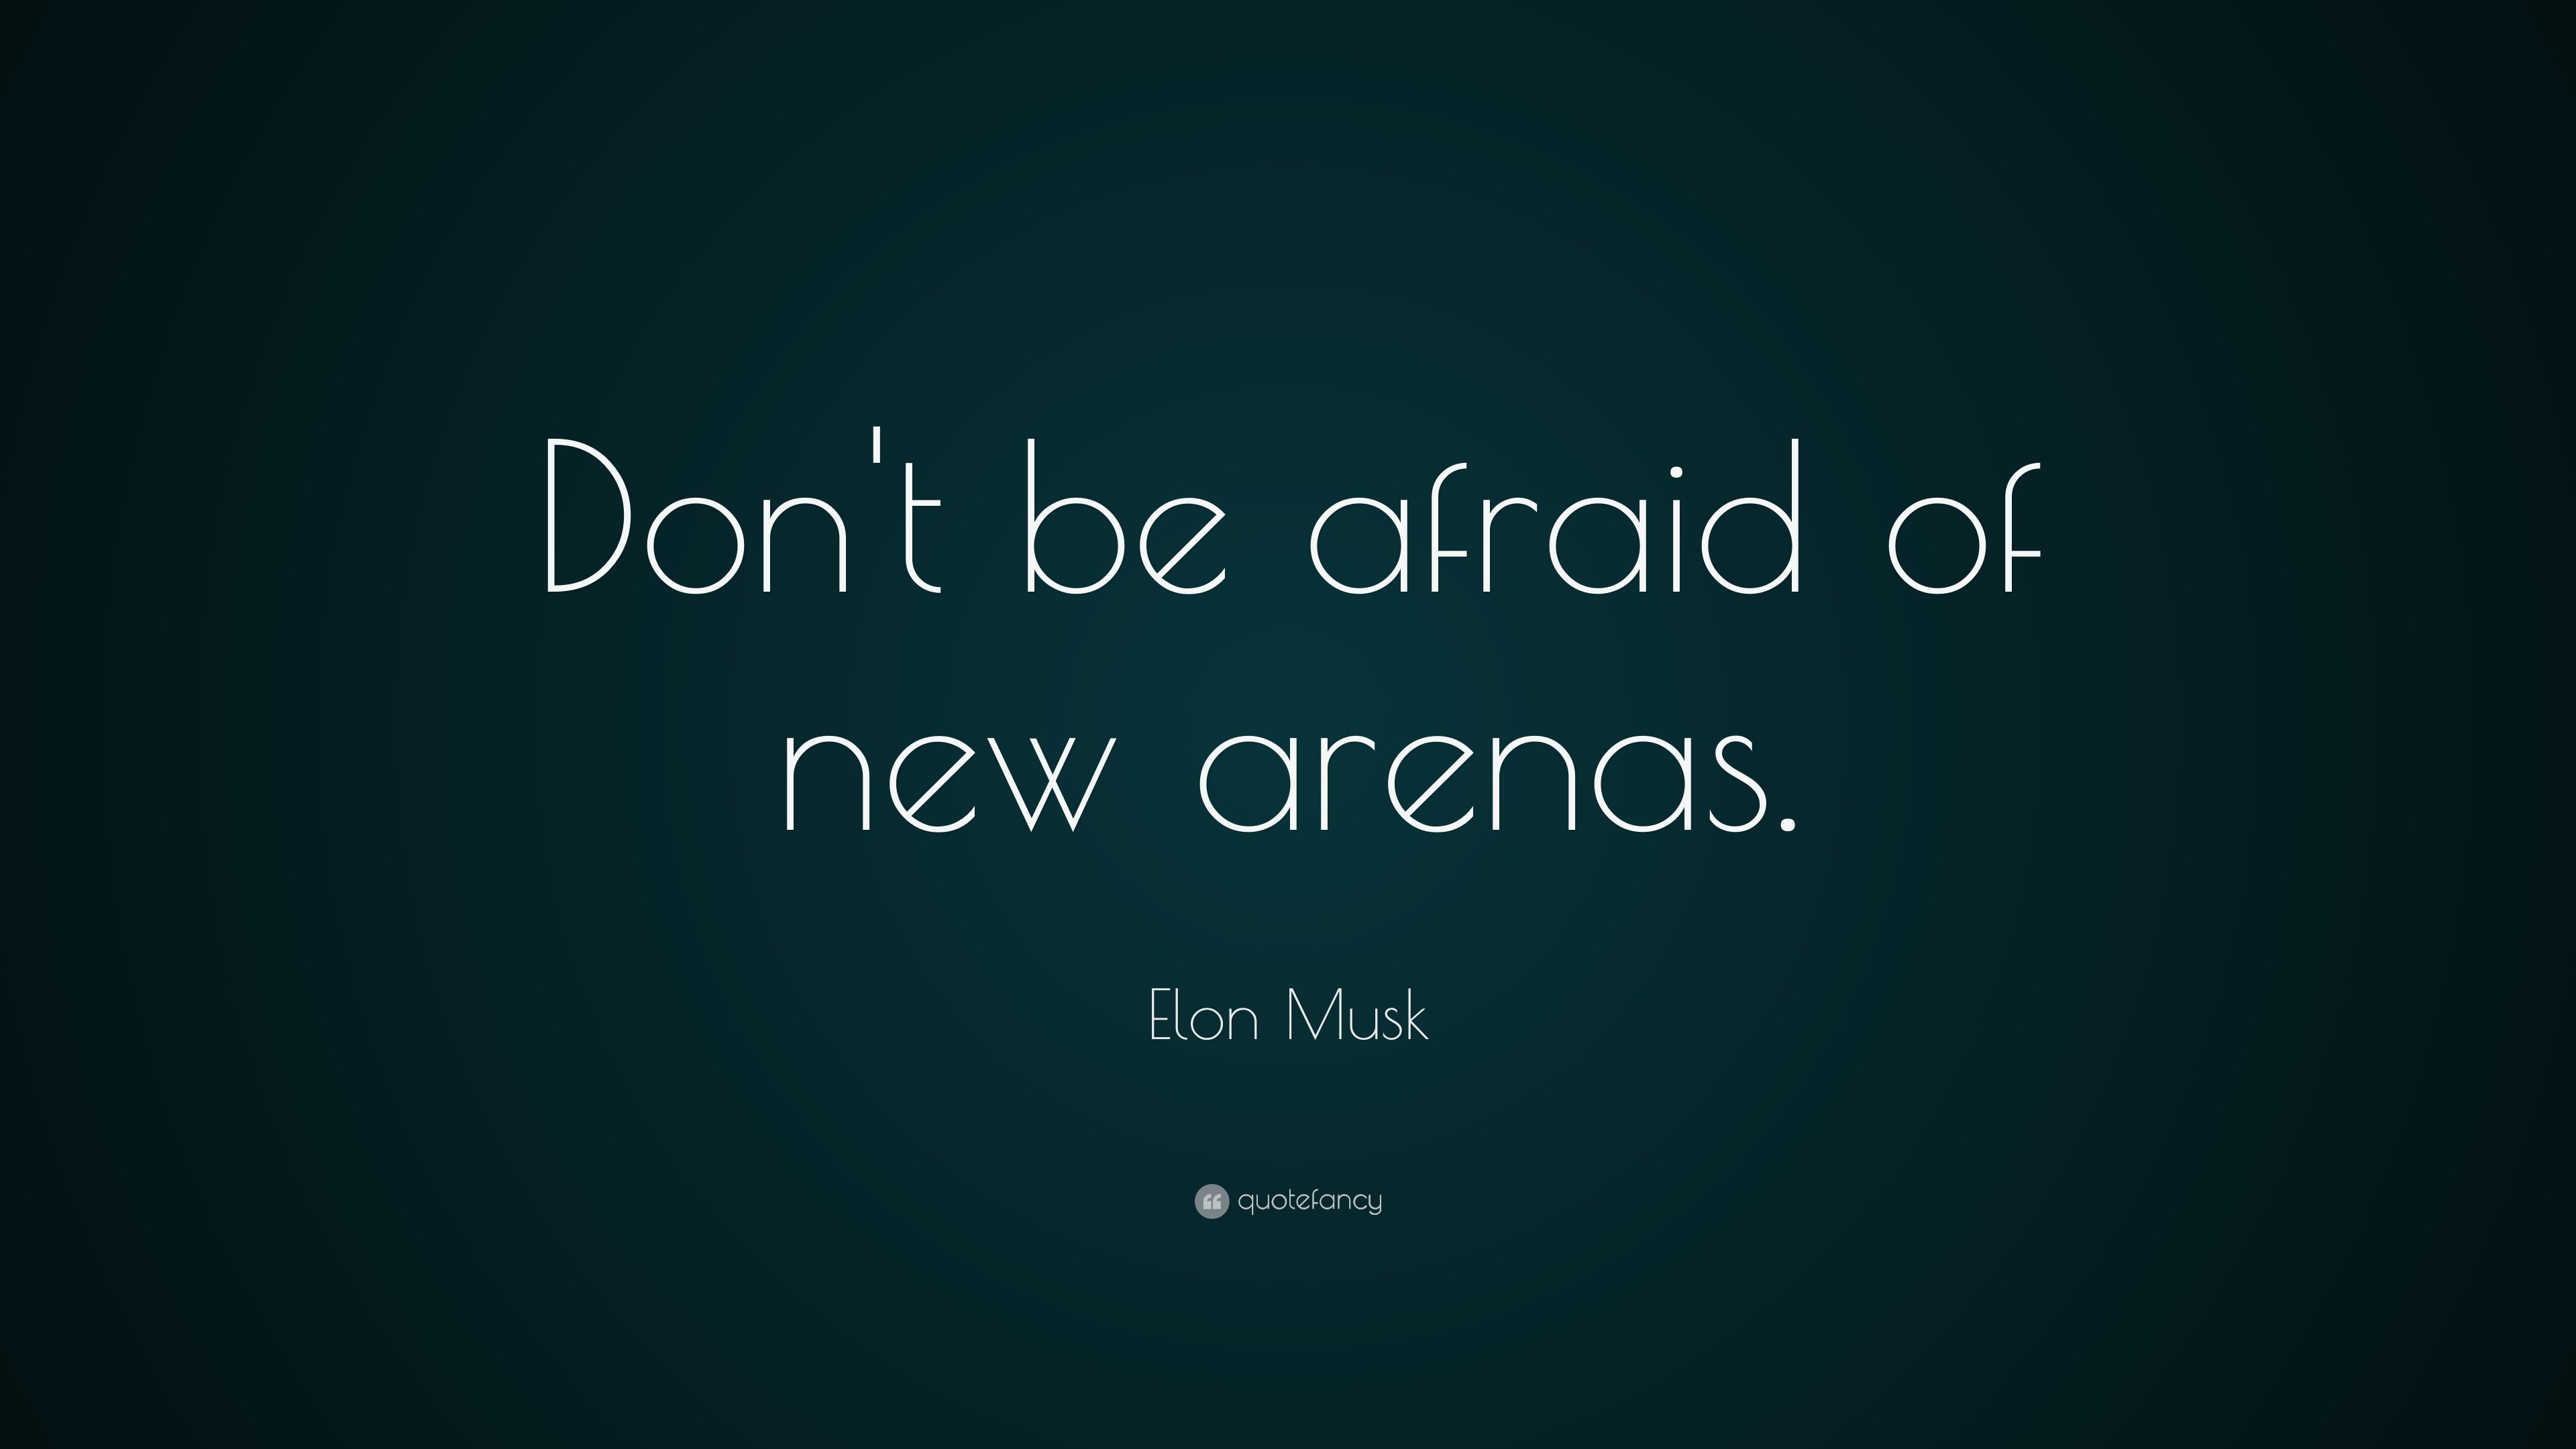 3840x2160 Elon Musk Quote: “Don't be afraid of new arenas.”